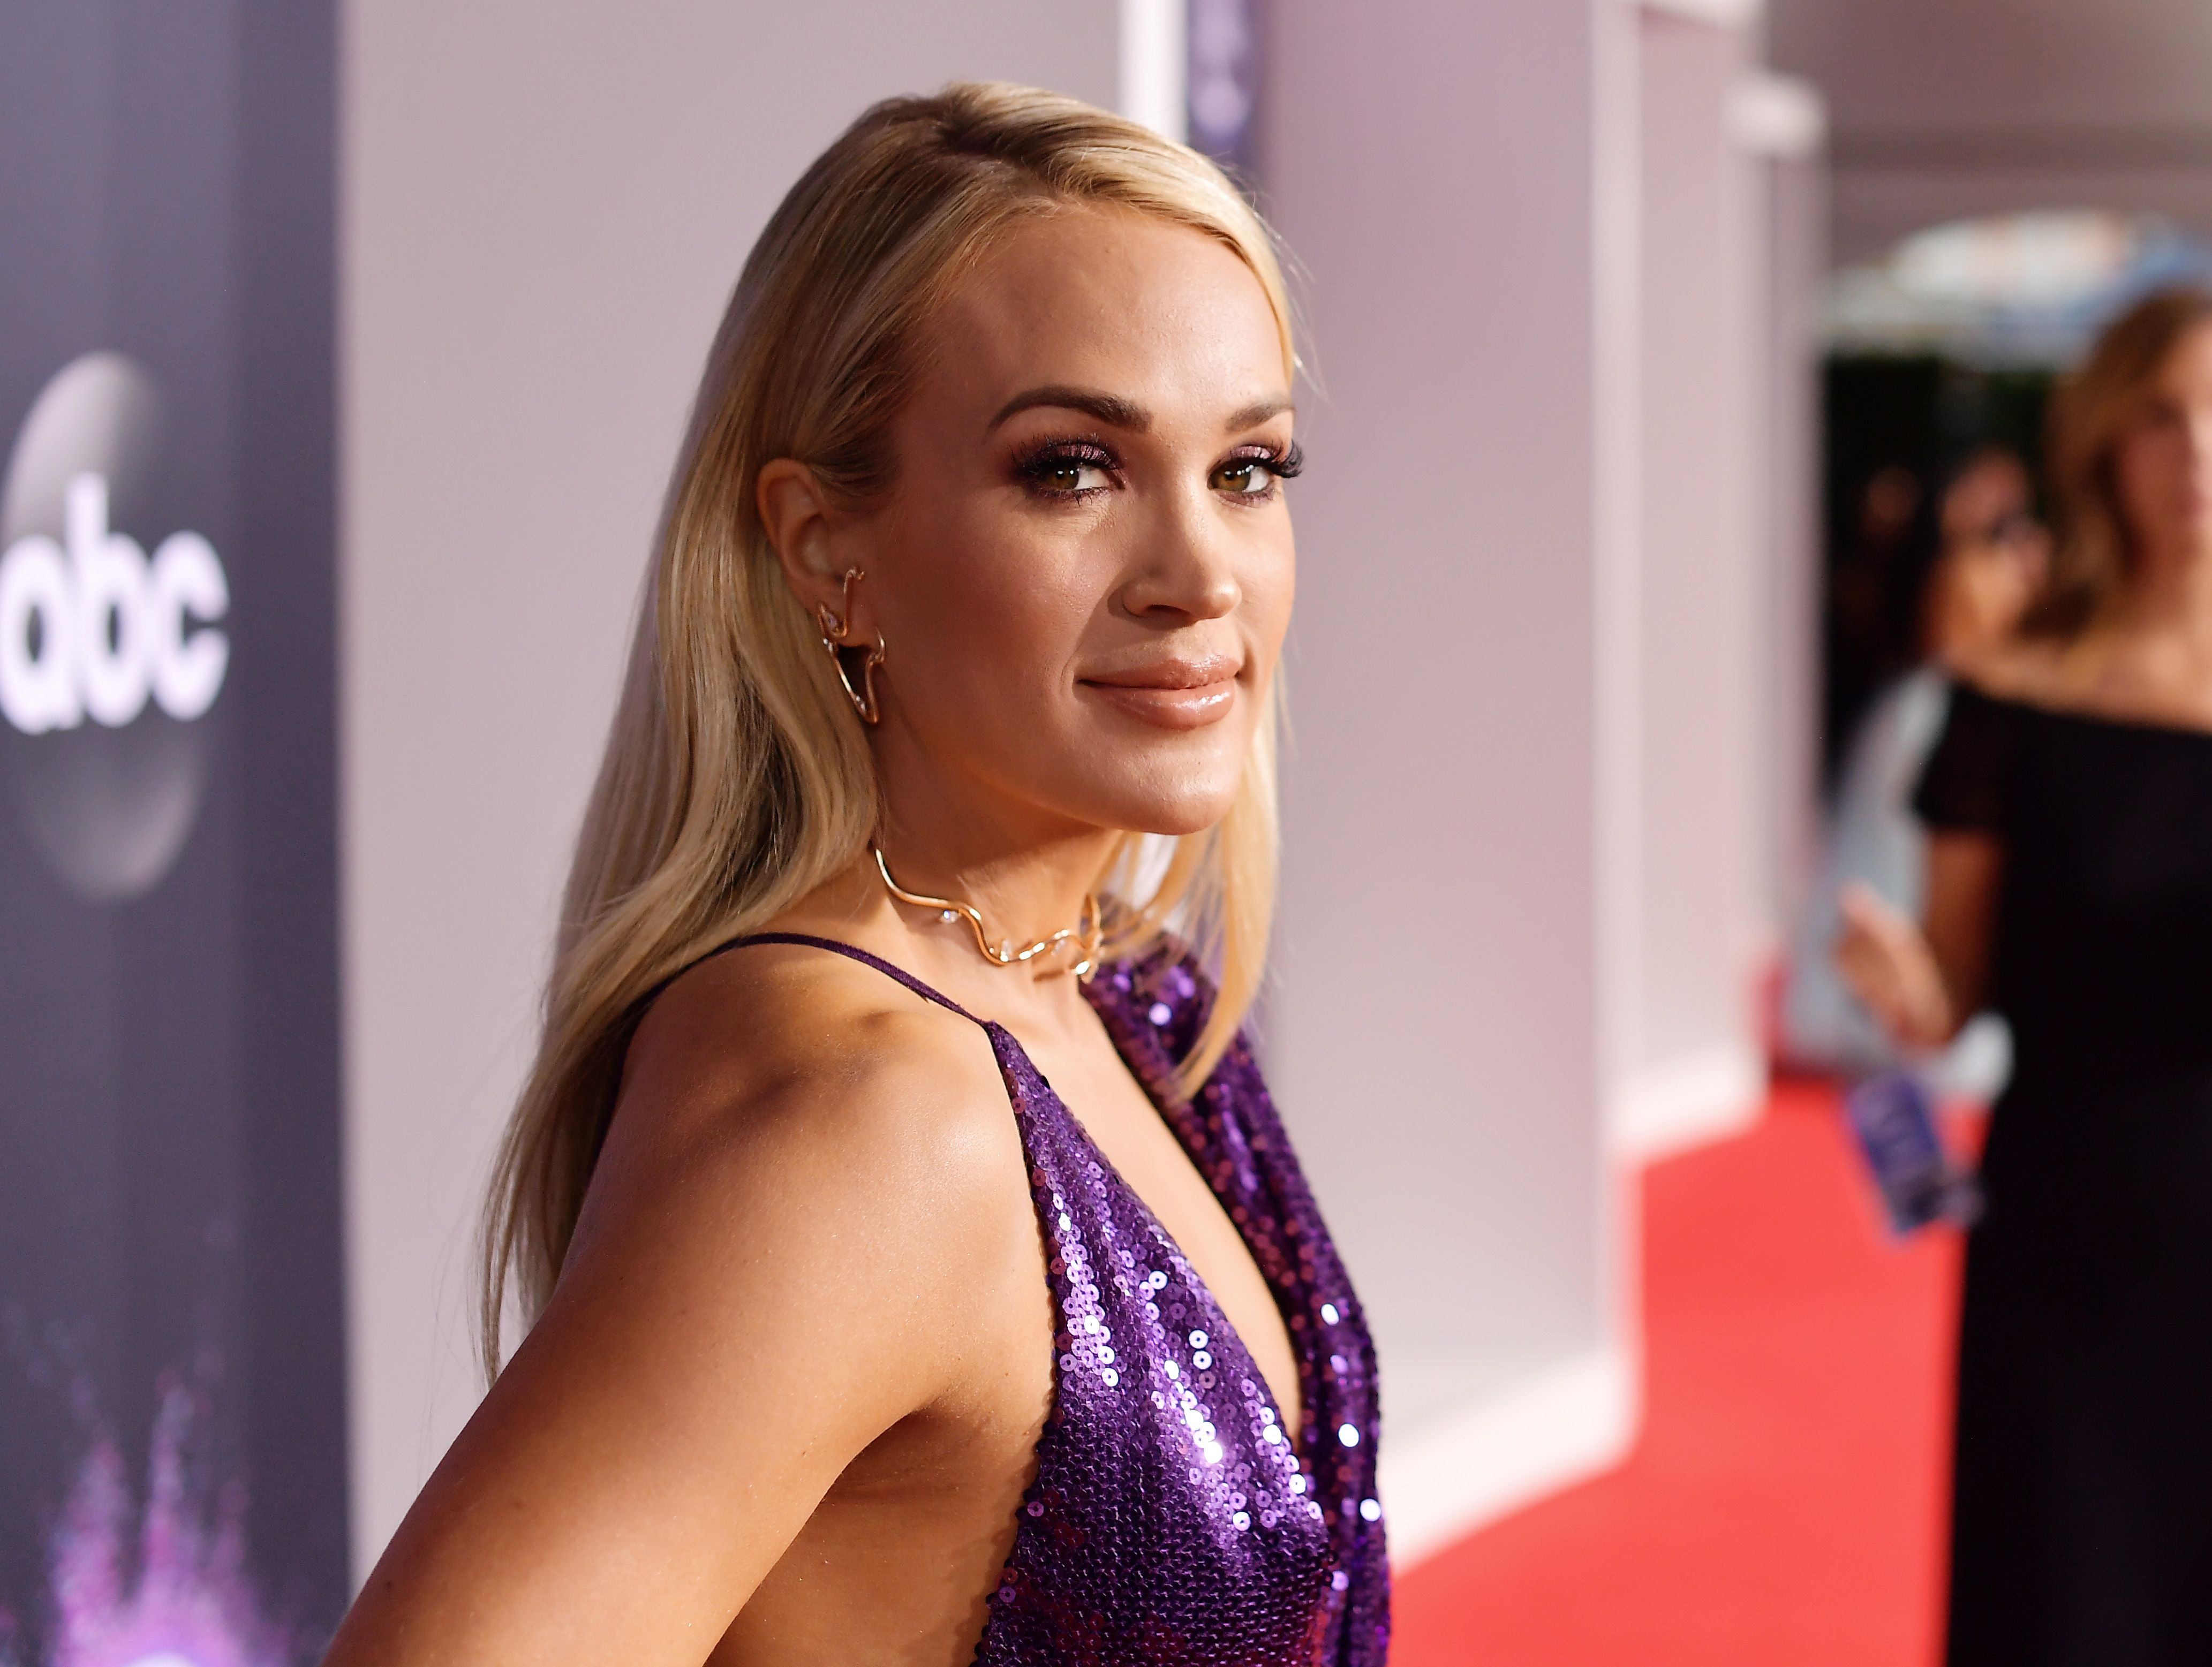 See Carrie Underwood Stun in a Crop Top in New Workout Instagram